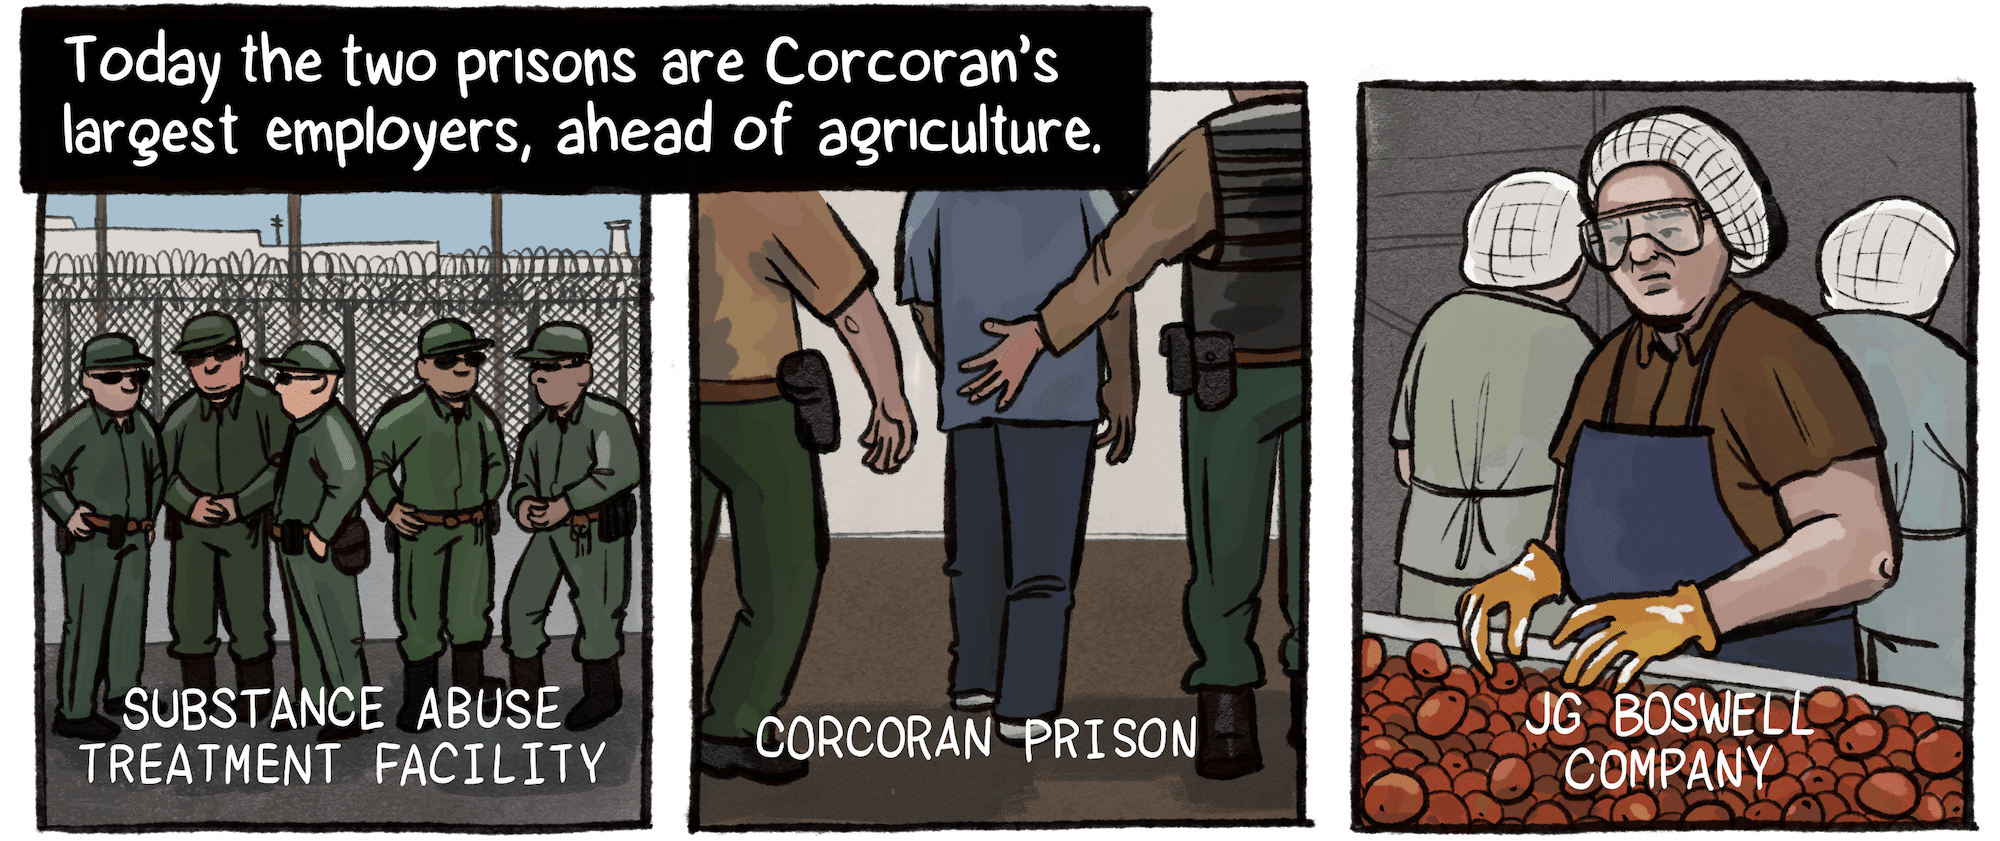 Today, the two prisons are Corcoran’s largest employers, ahead of agriculture. A series of images show guards at the Substance Abuse Treatment Facility, guards leading a prisoner at Corcoran Prison, and a worker sorting tomatoes at J.G. Boswell Company.